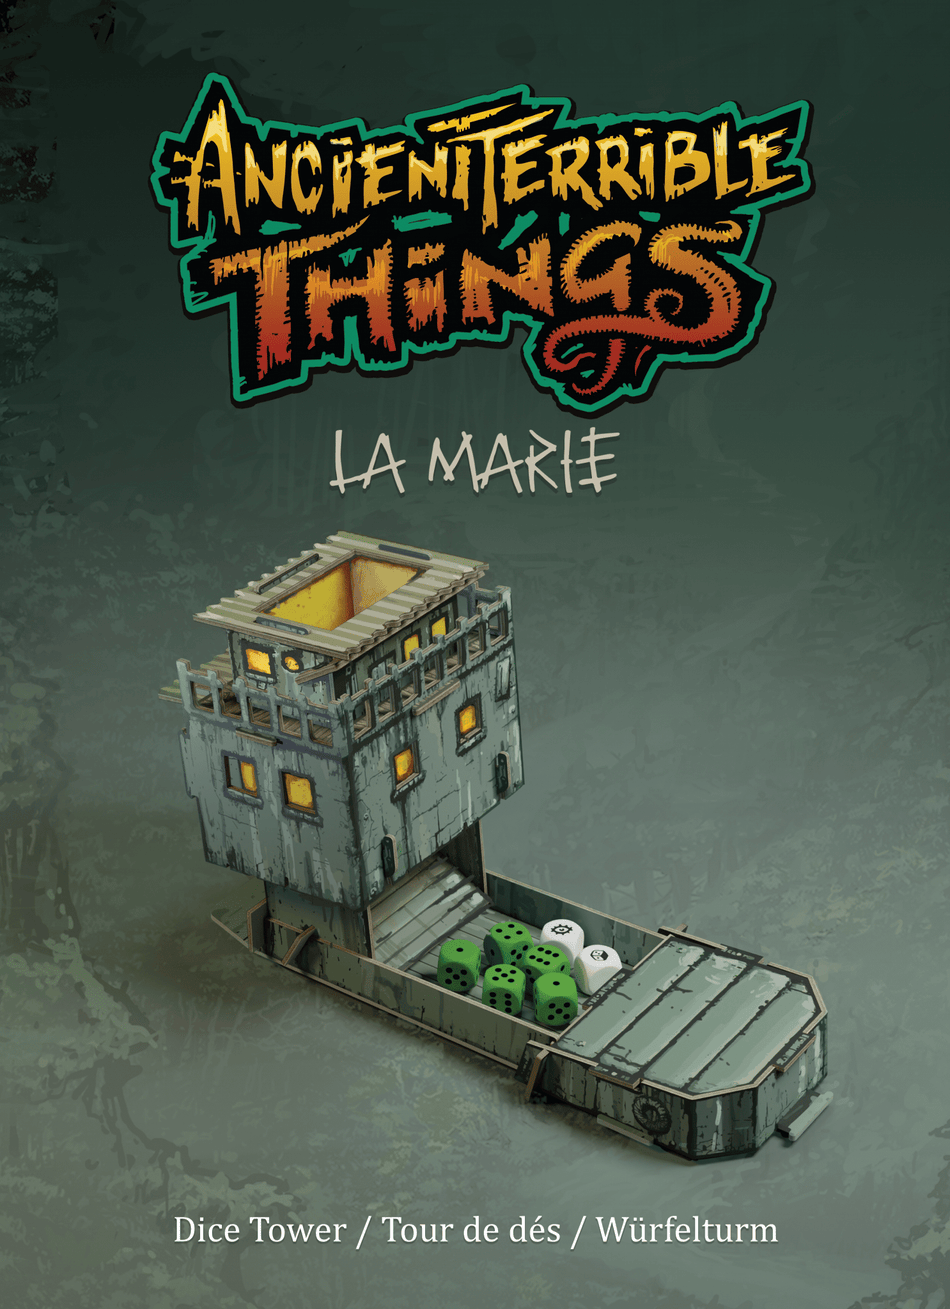 Ancient Terrible Things: La Marie Dice Tower